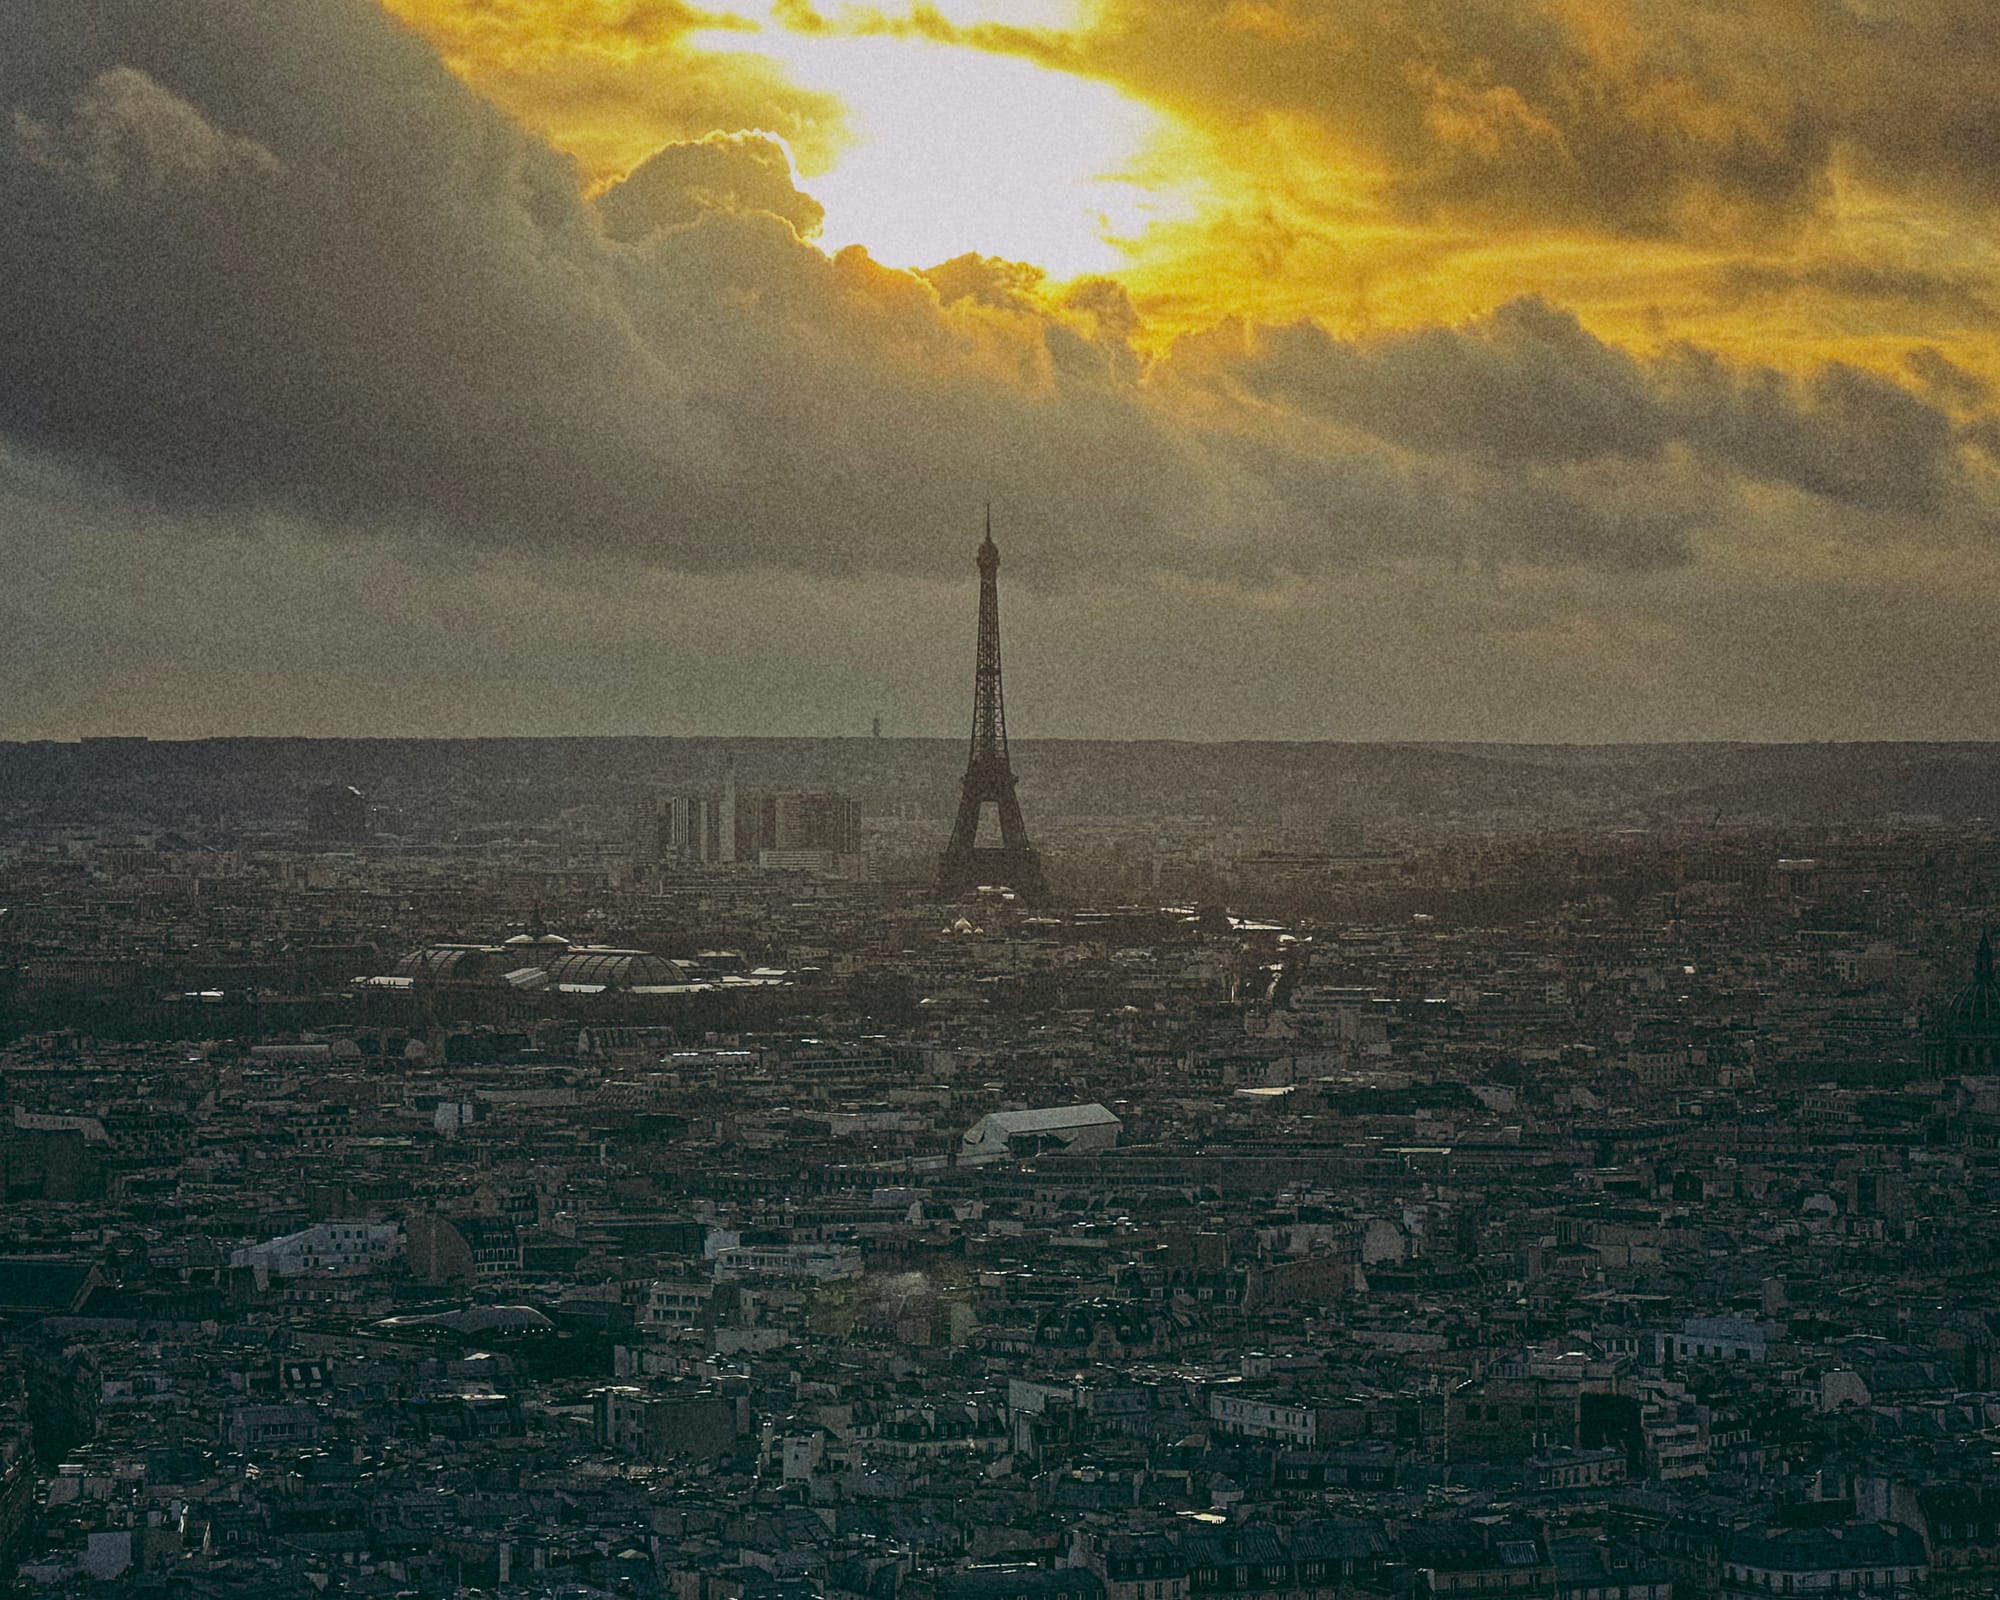 A view of the Eiffel Tower from Sacré-Cœur, the city of Paris a background against the setting sun in the clouds